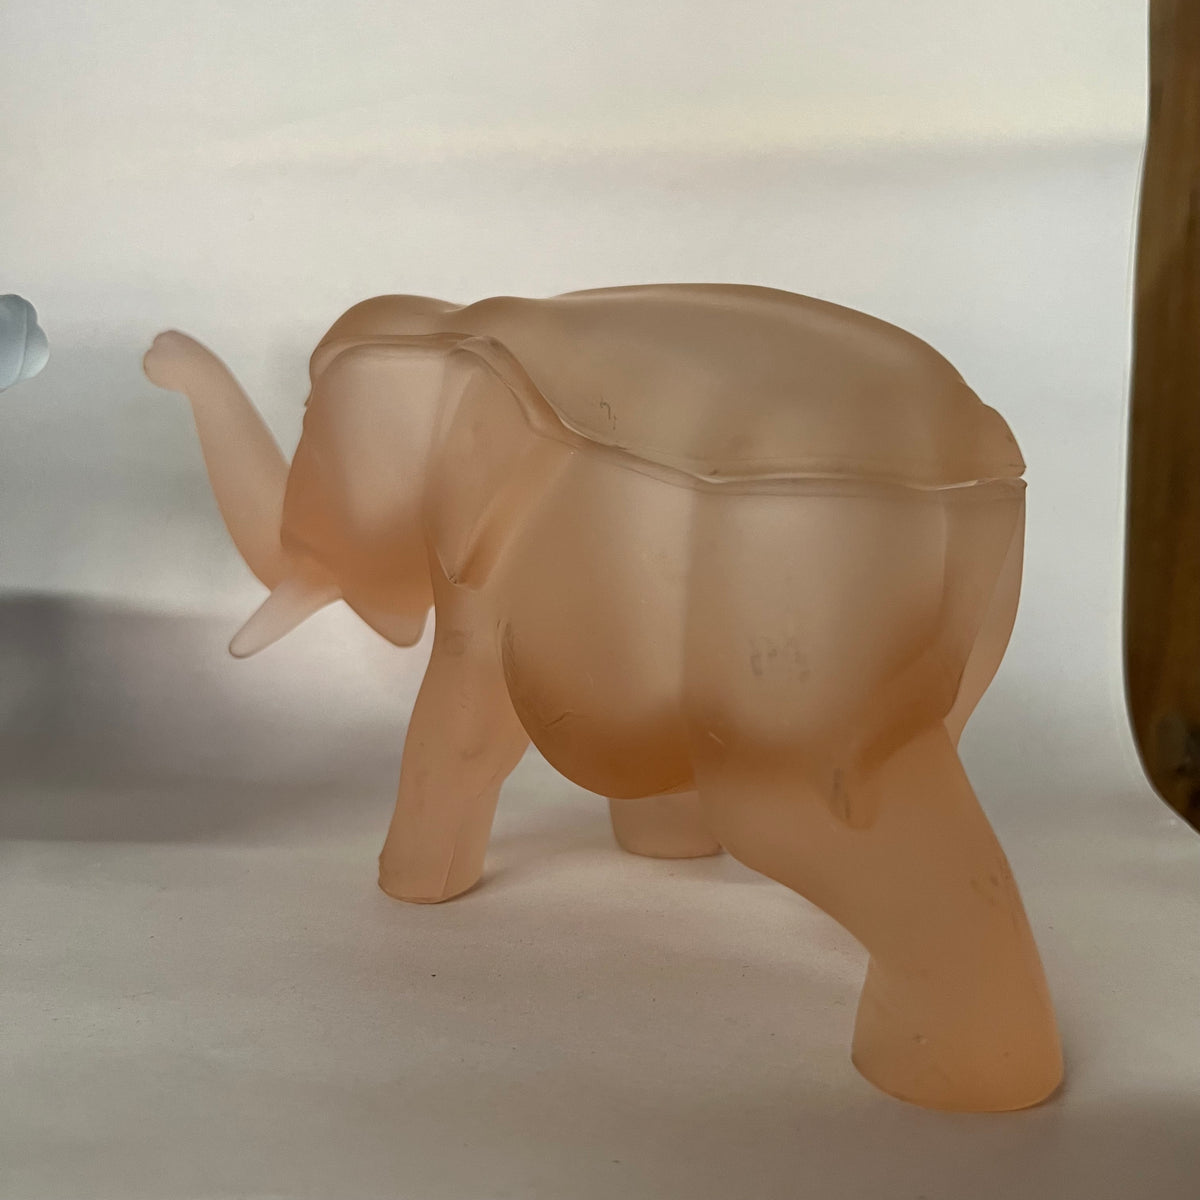 Made by Indiana Glass for Tiara, this glass elephant lidded trinket box is as unique as it is functional. Perfect for everything from buttons to jewelry to candy and more. Dates to the 1980s.